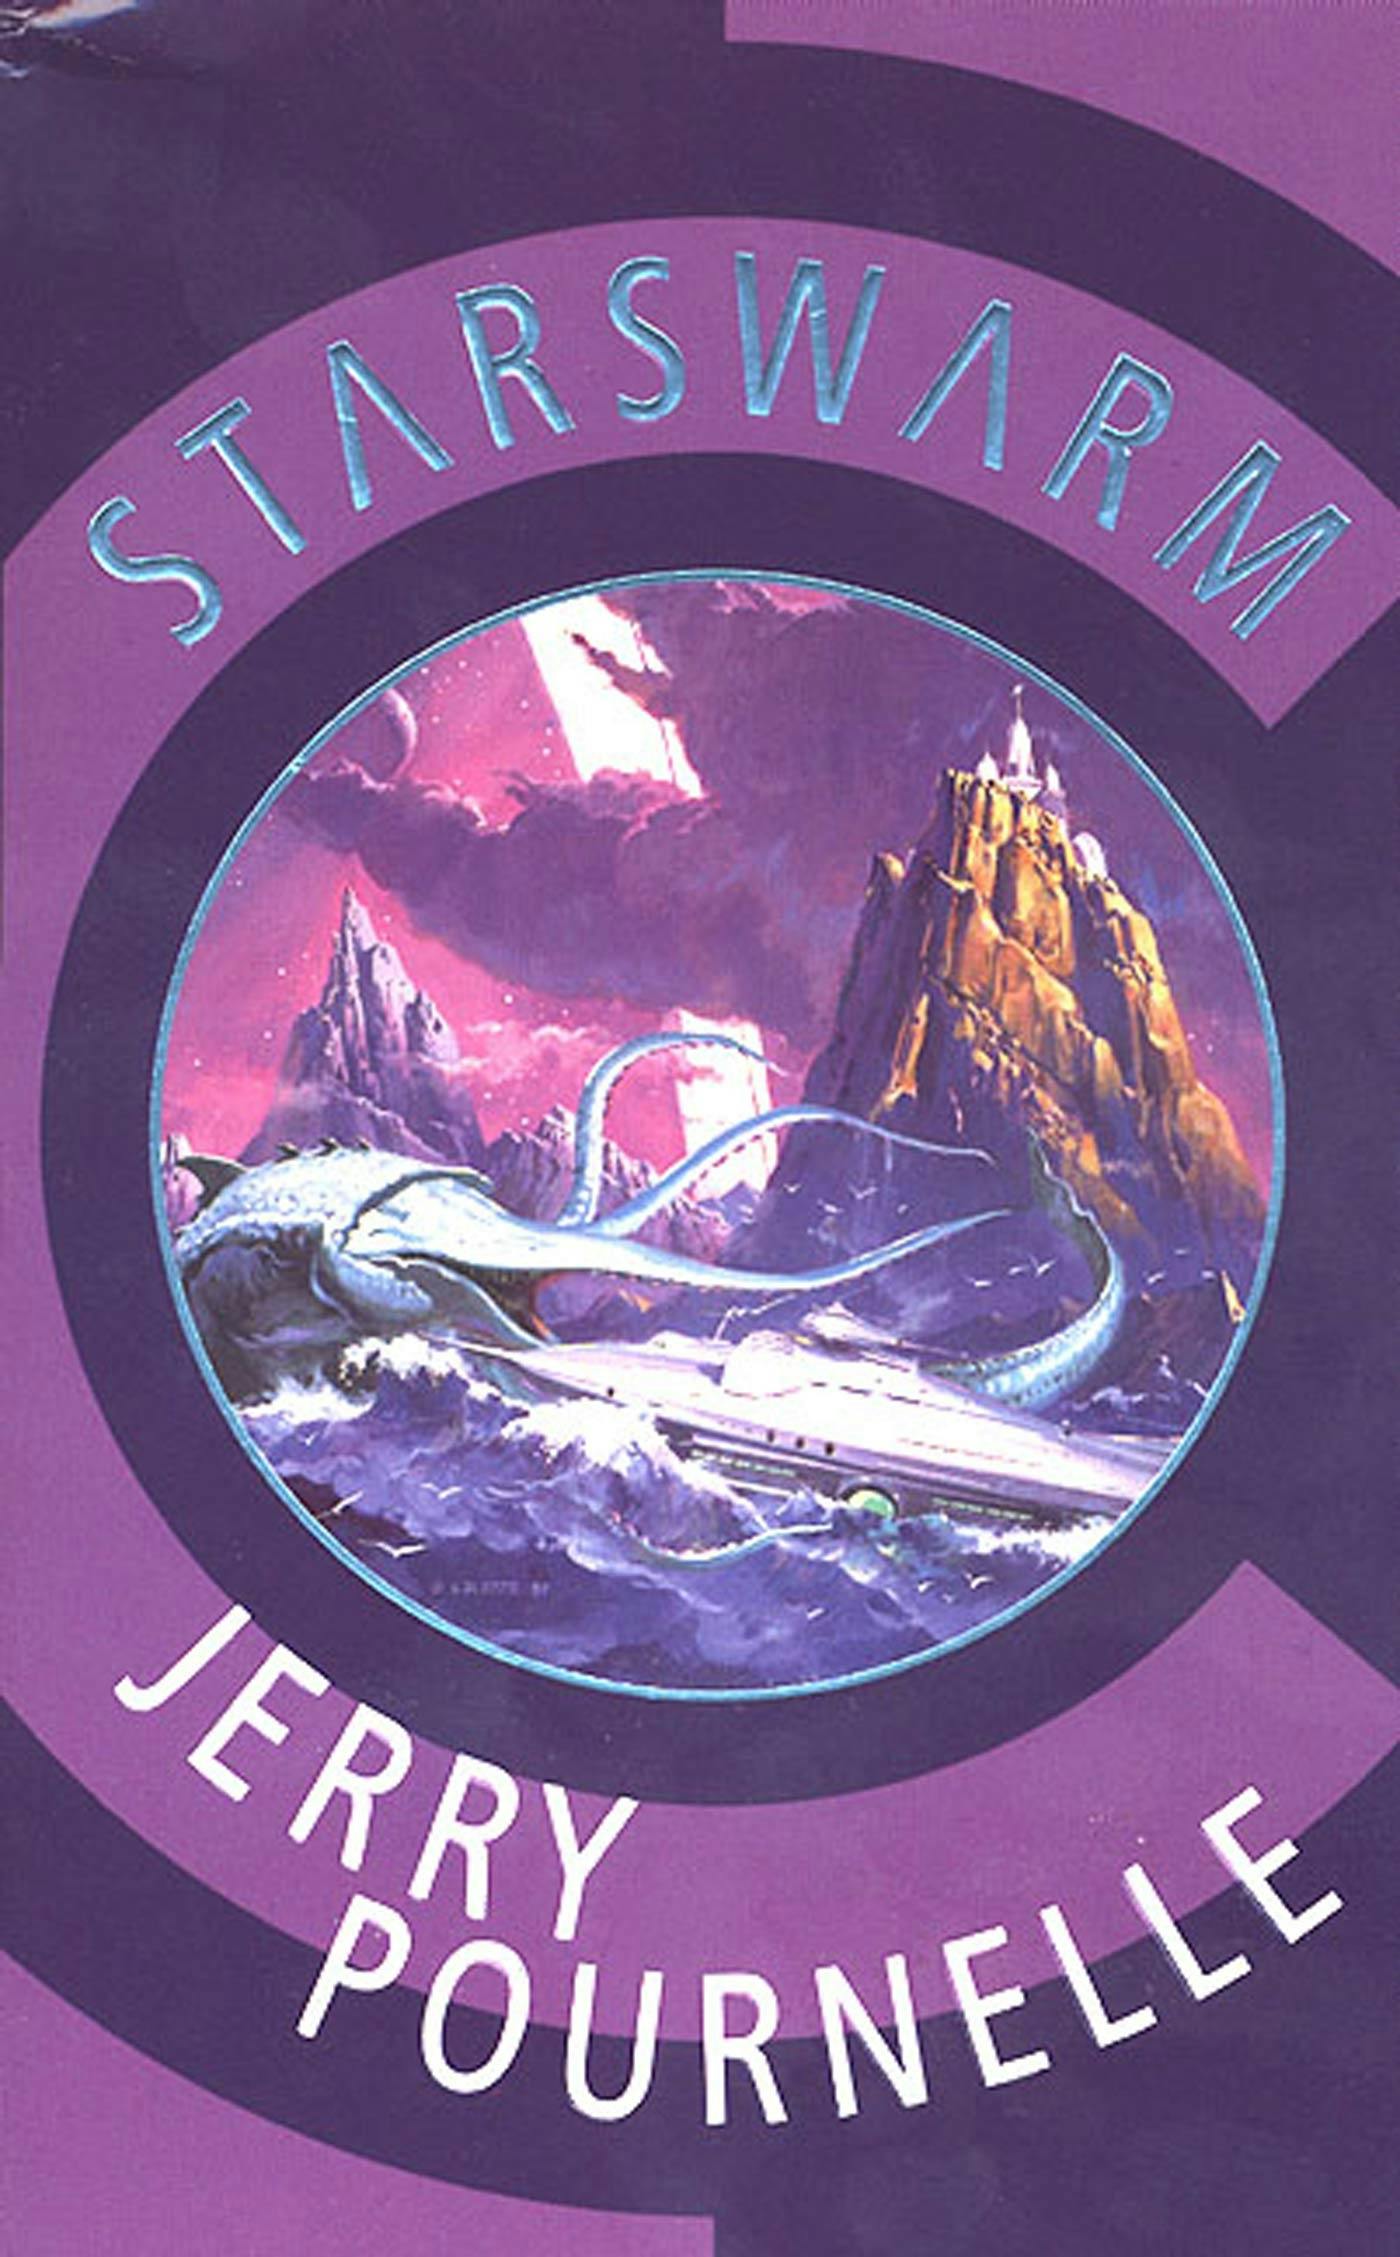 Cover for the book titled as: Starswarm